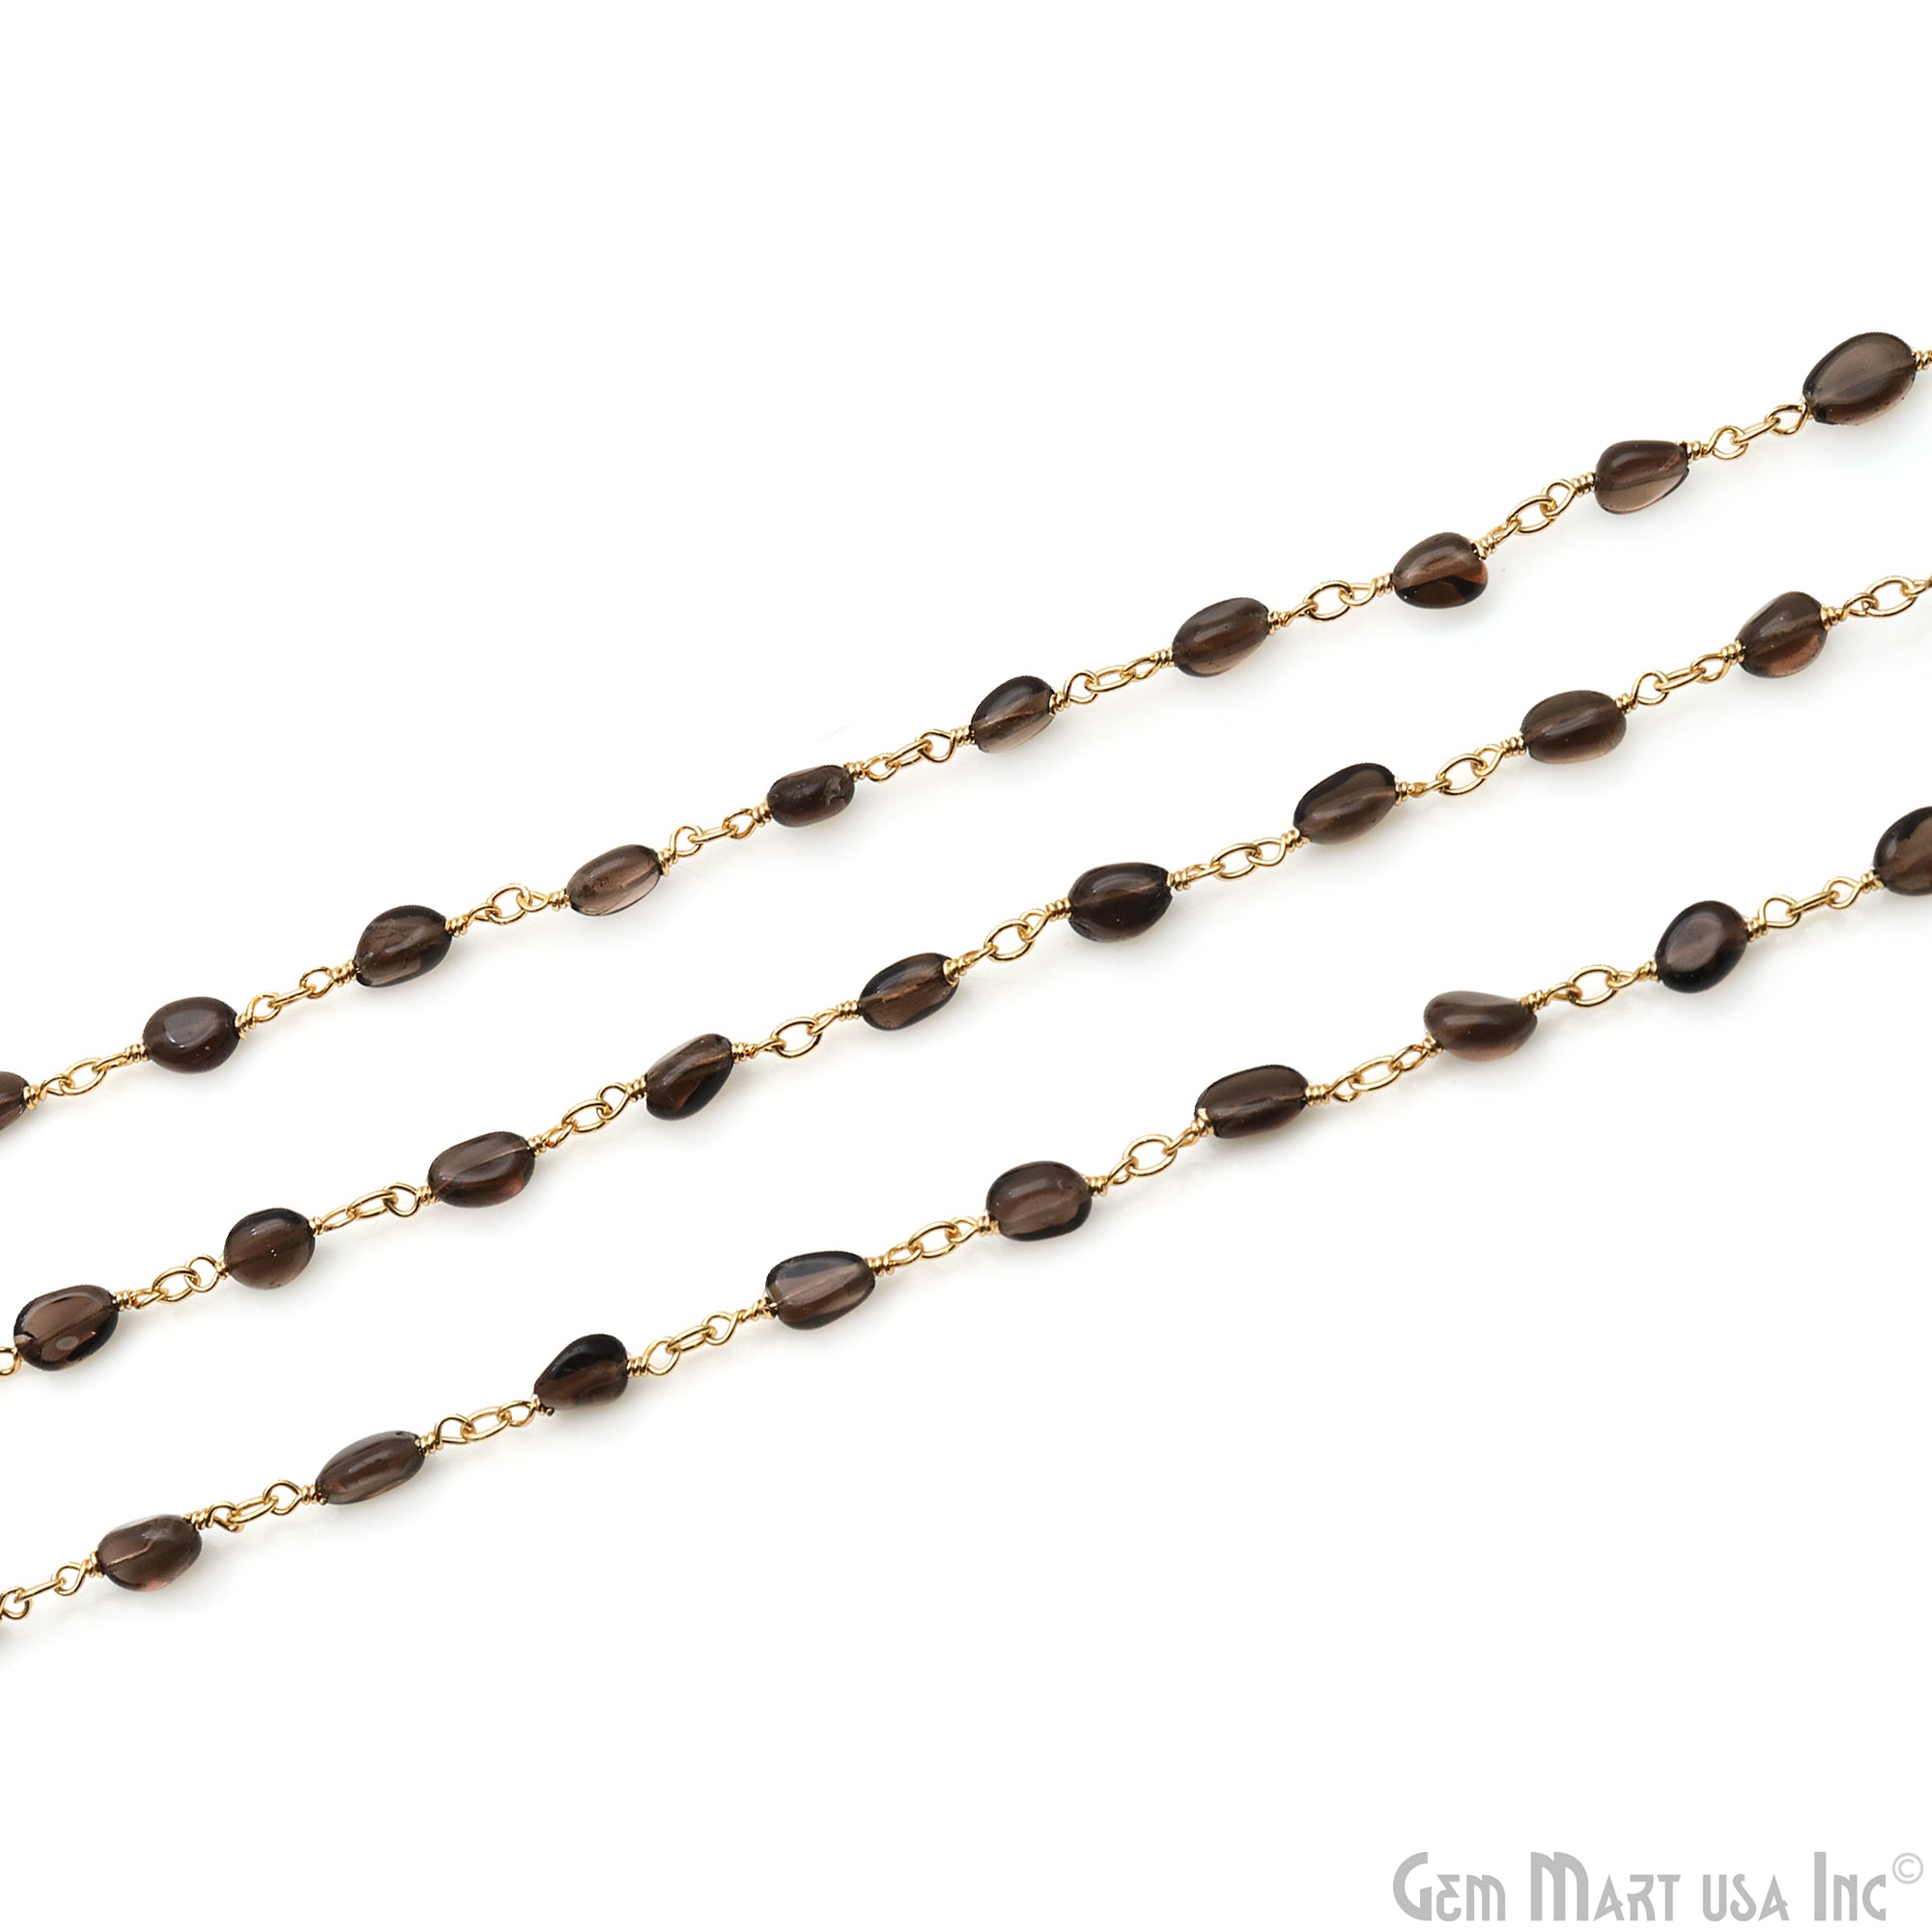 Smoky Topaz Tumble Beads 8x5mm Gold Wire Wrapped Rosary Chain